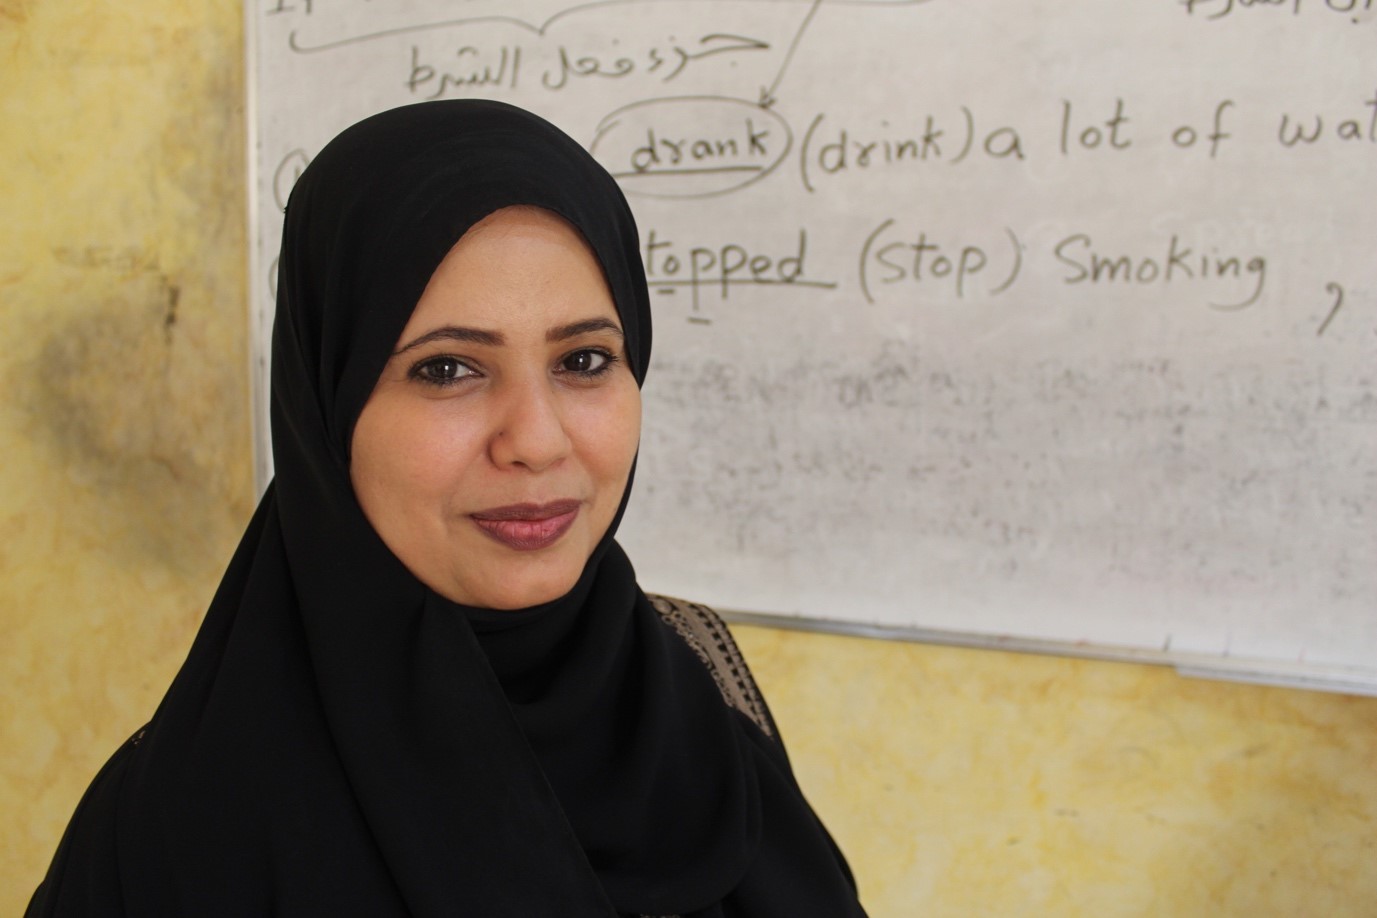 A woman wearing a black hijab stands confidently in front of a whiteboard, ready to present or teach.